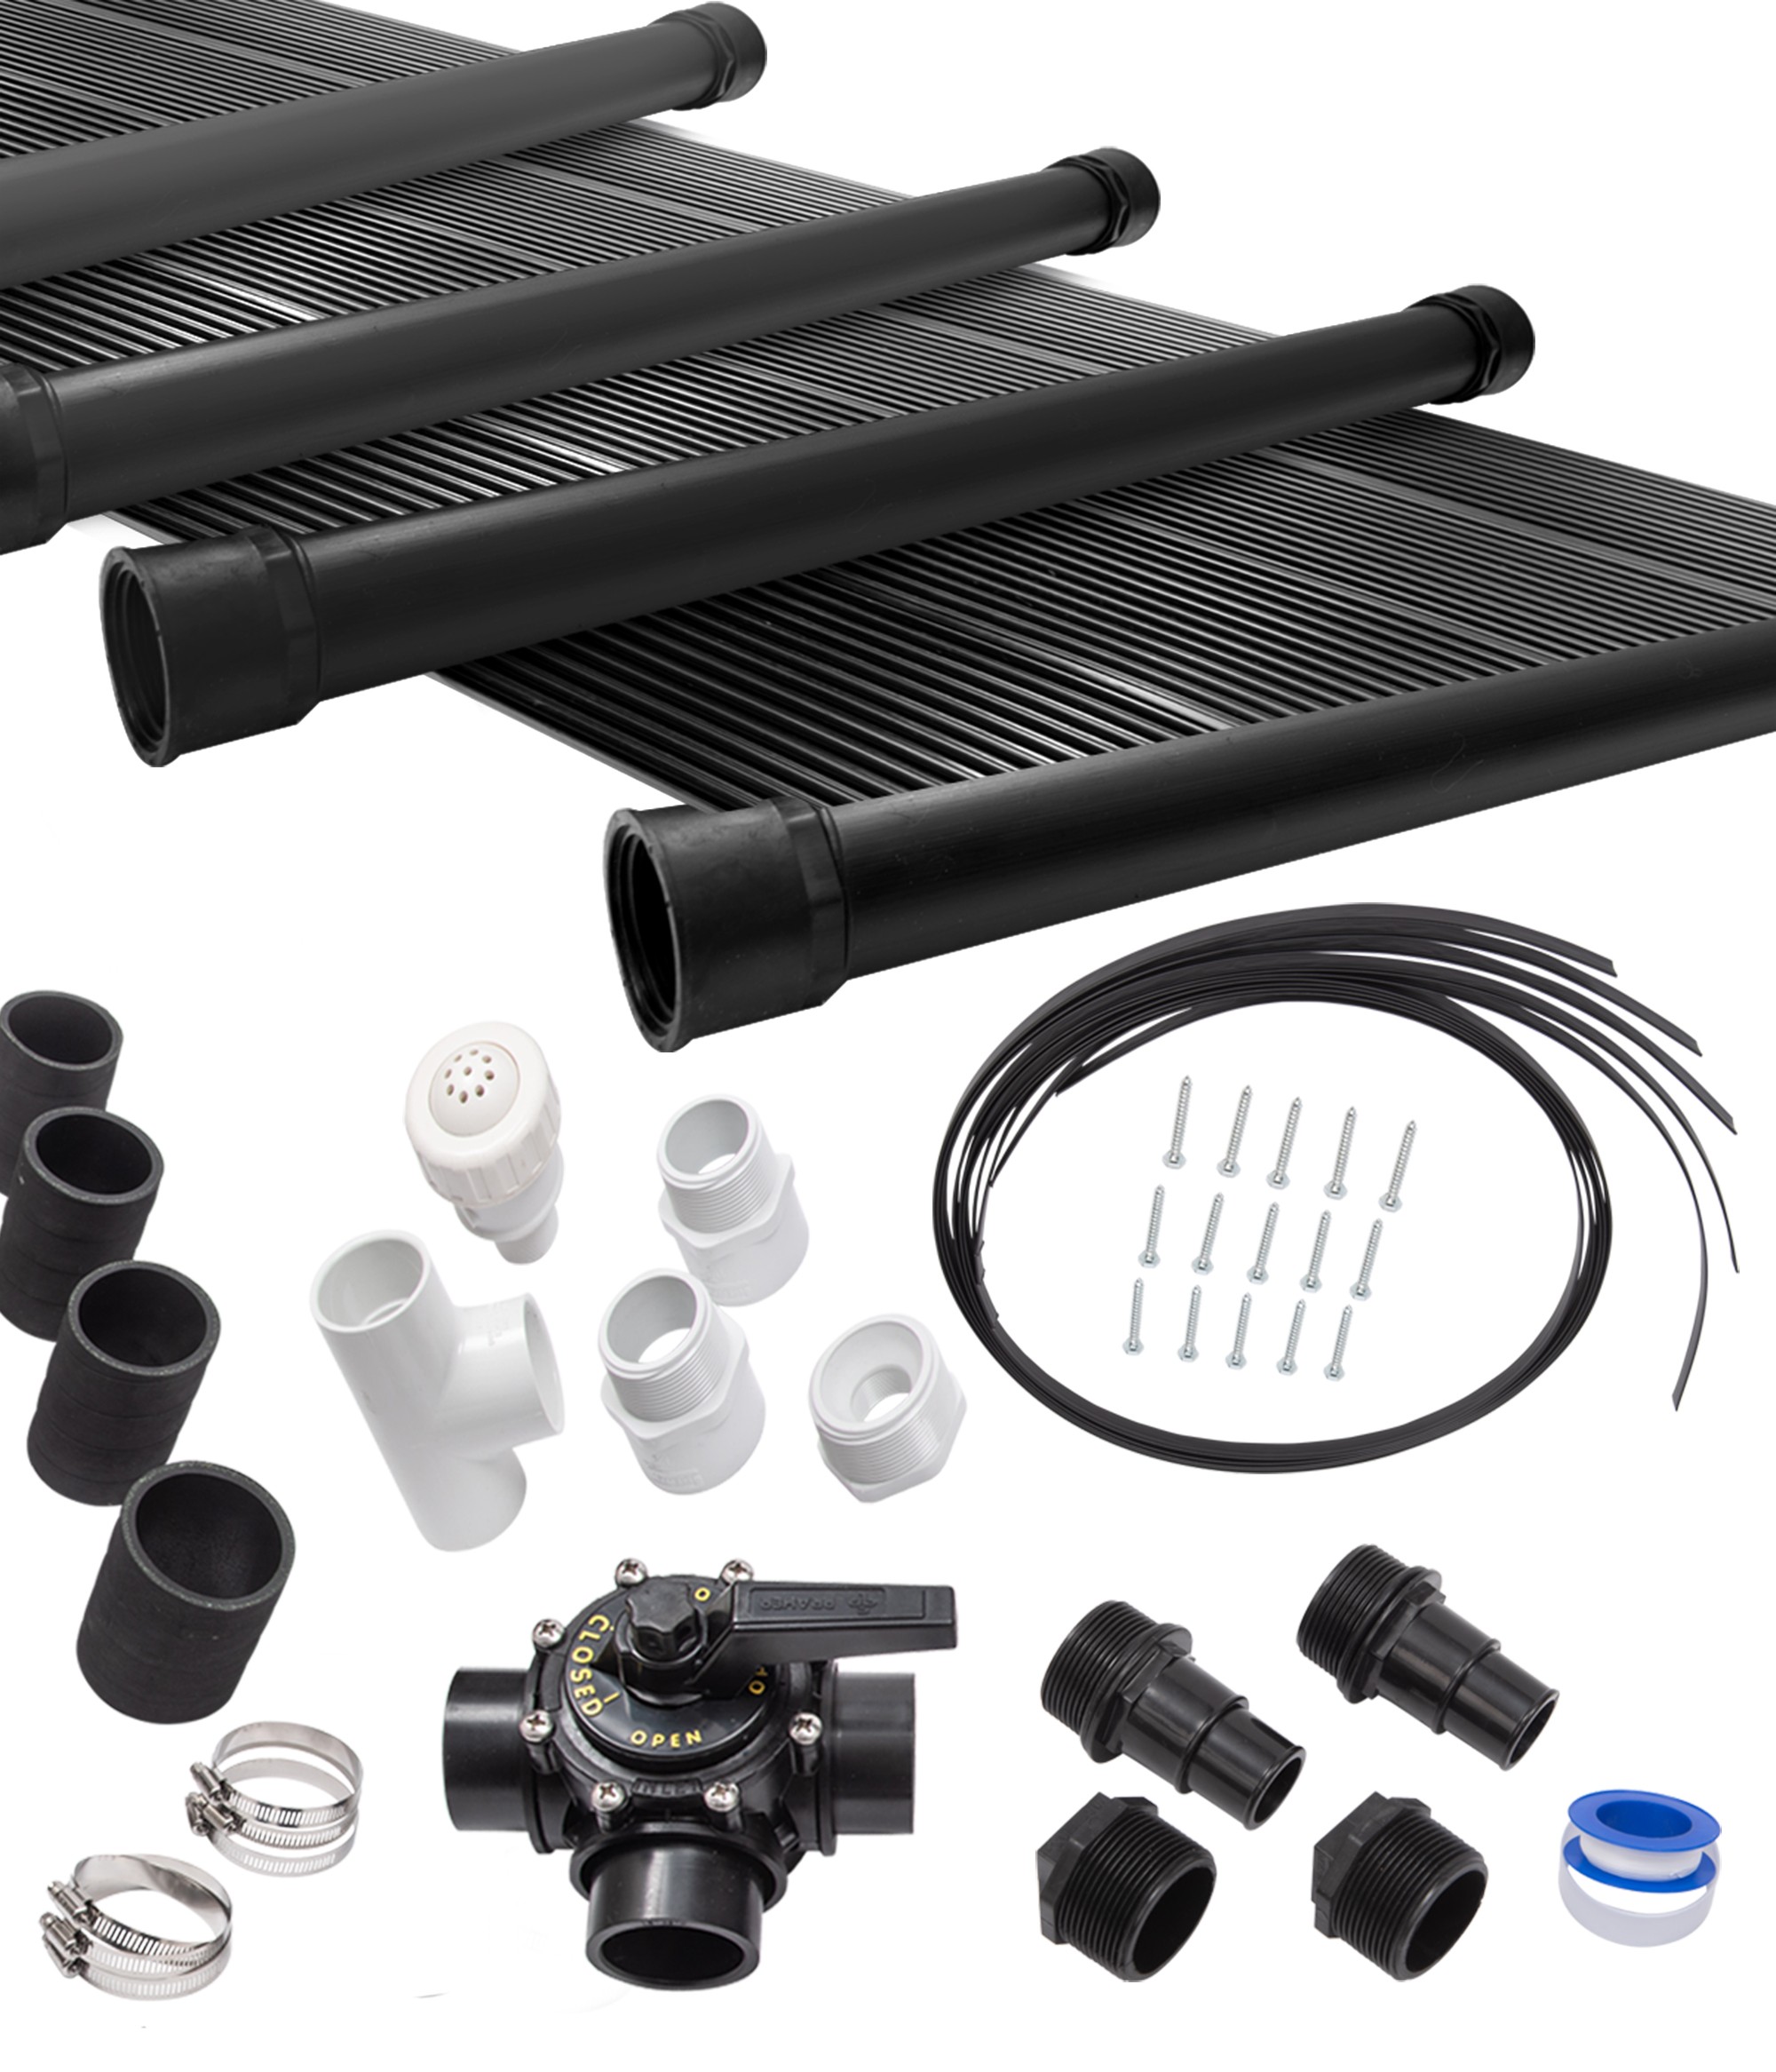 10-2X12' SunQuest Solar Swimming Pool Heater Complete System with Roof Kits